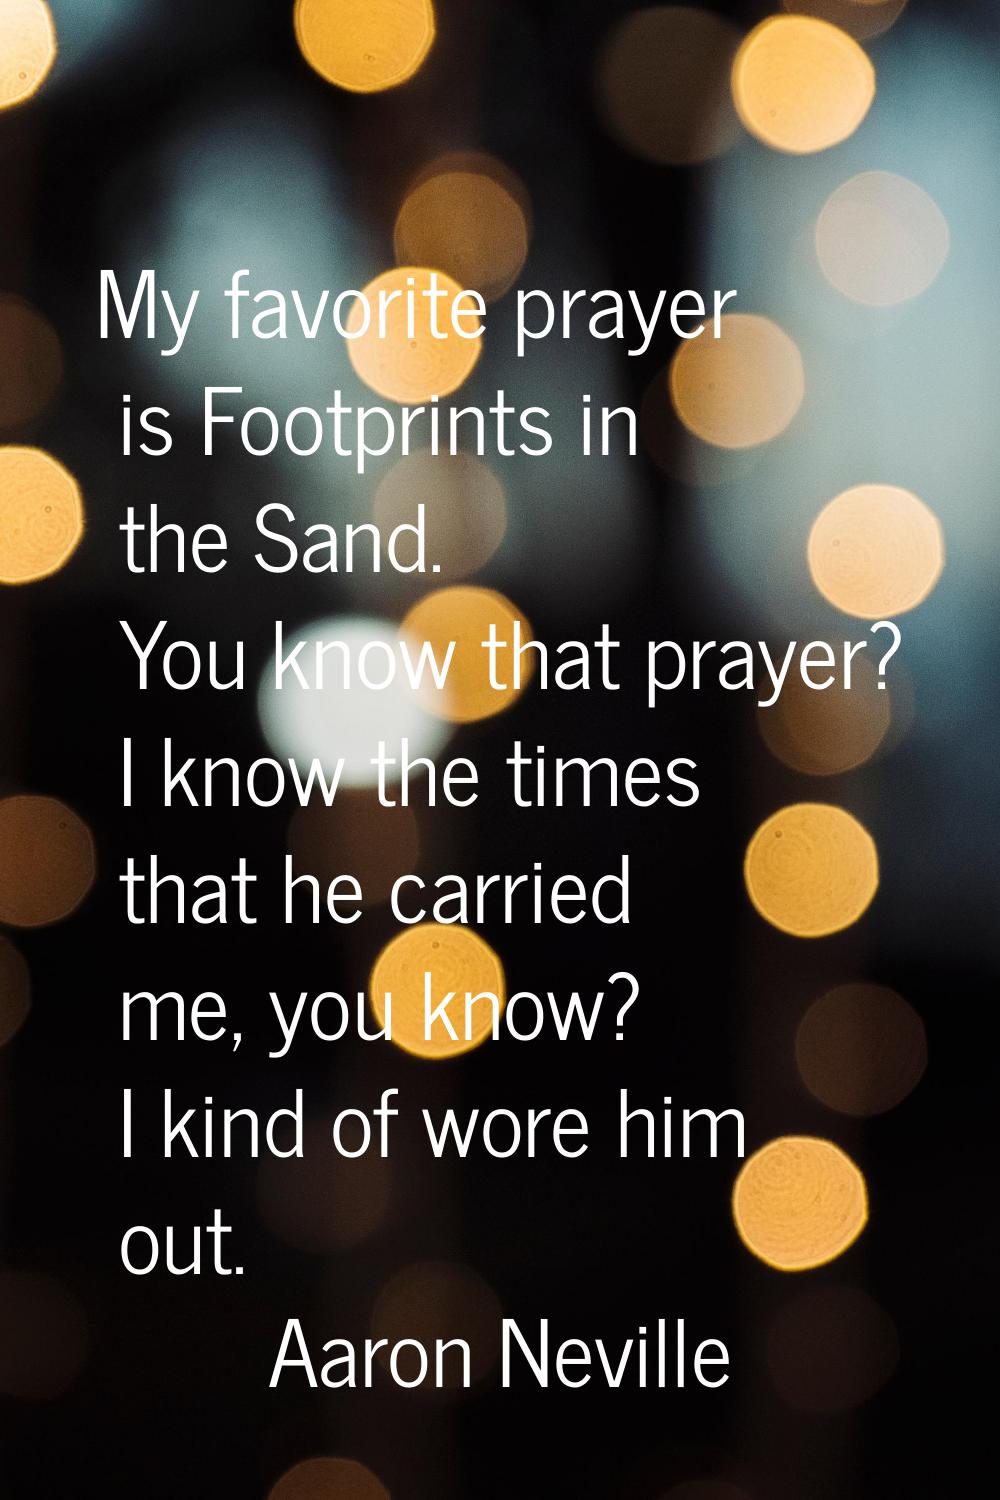 My favorite prayer is Footprints in the Sand. You know that prayer? I know the times that he carrie